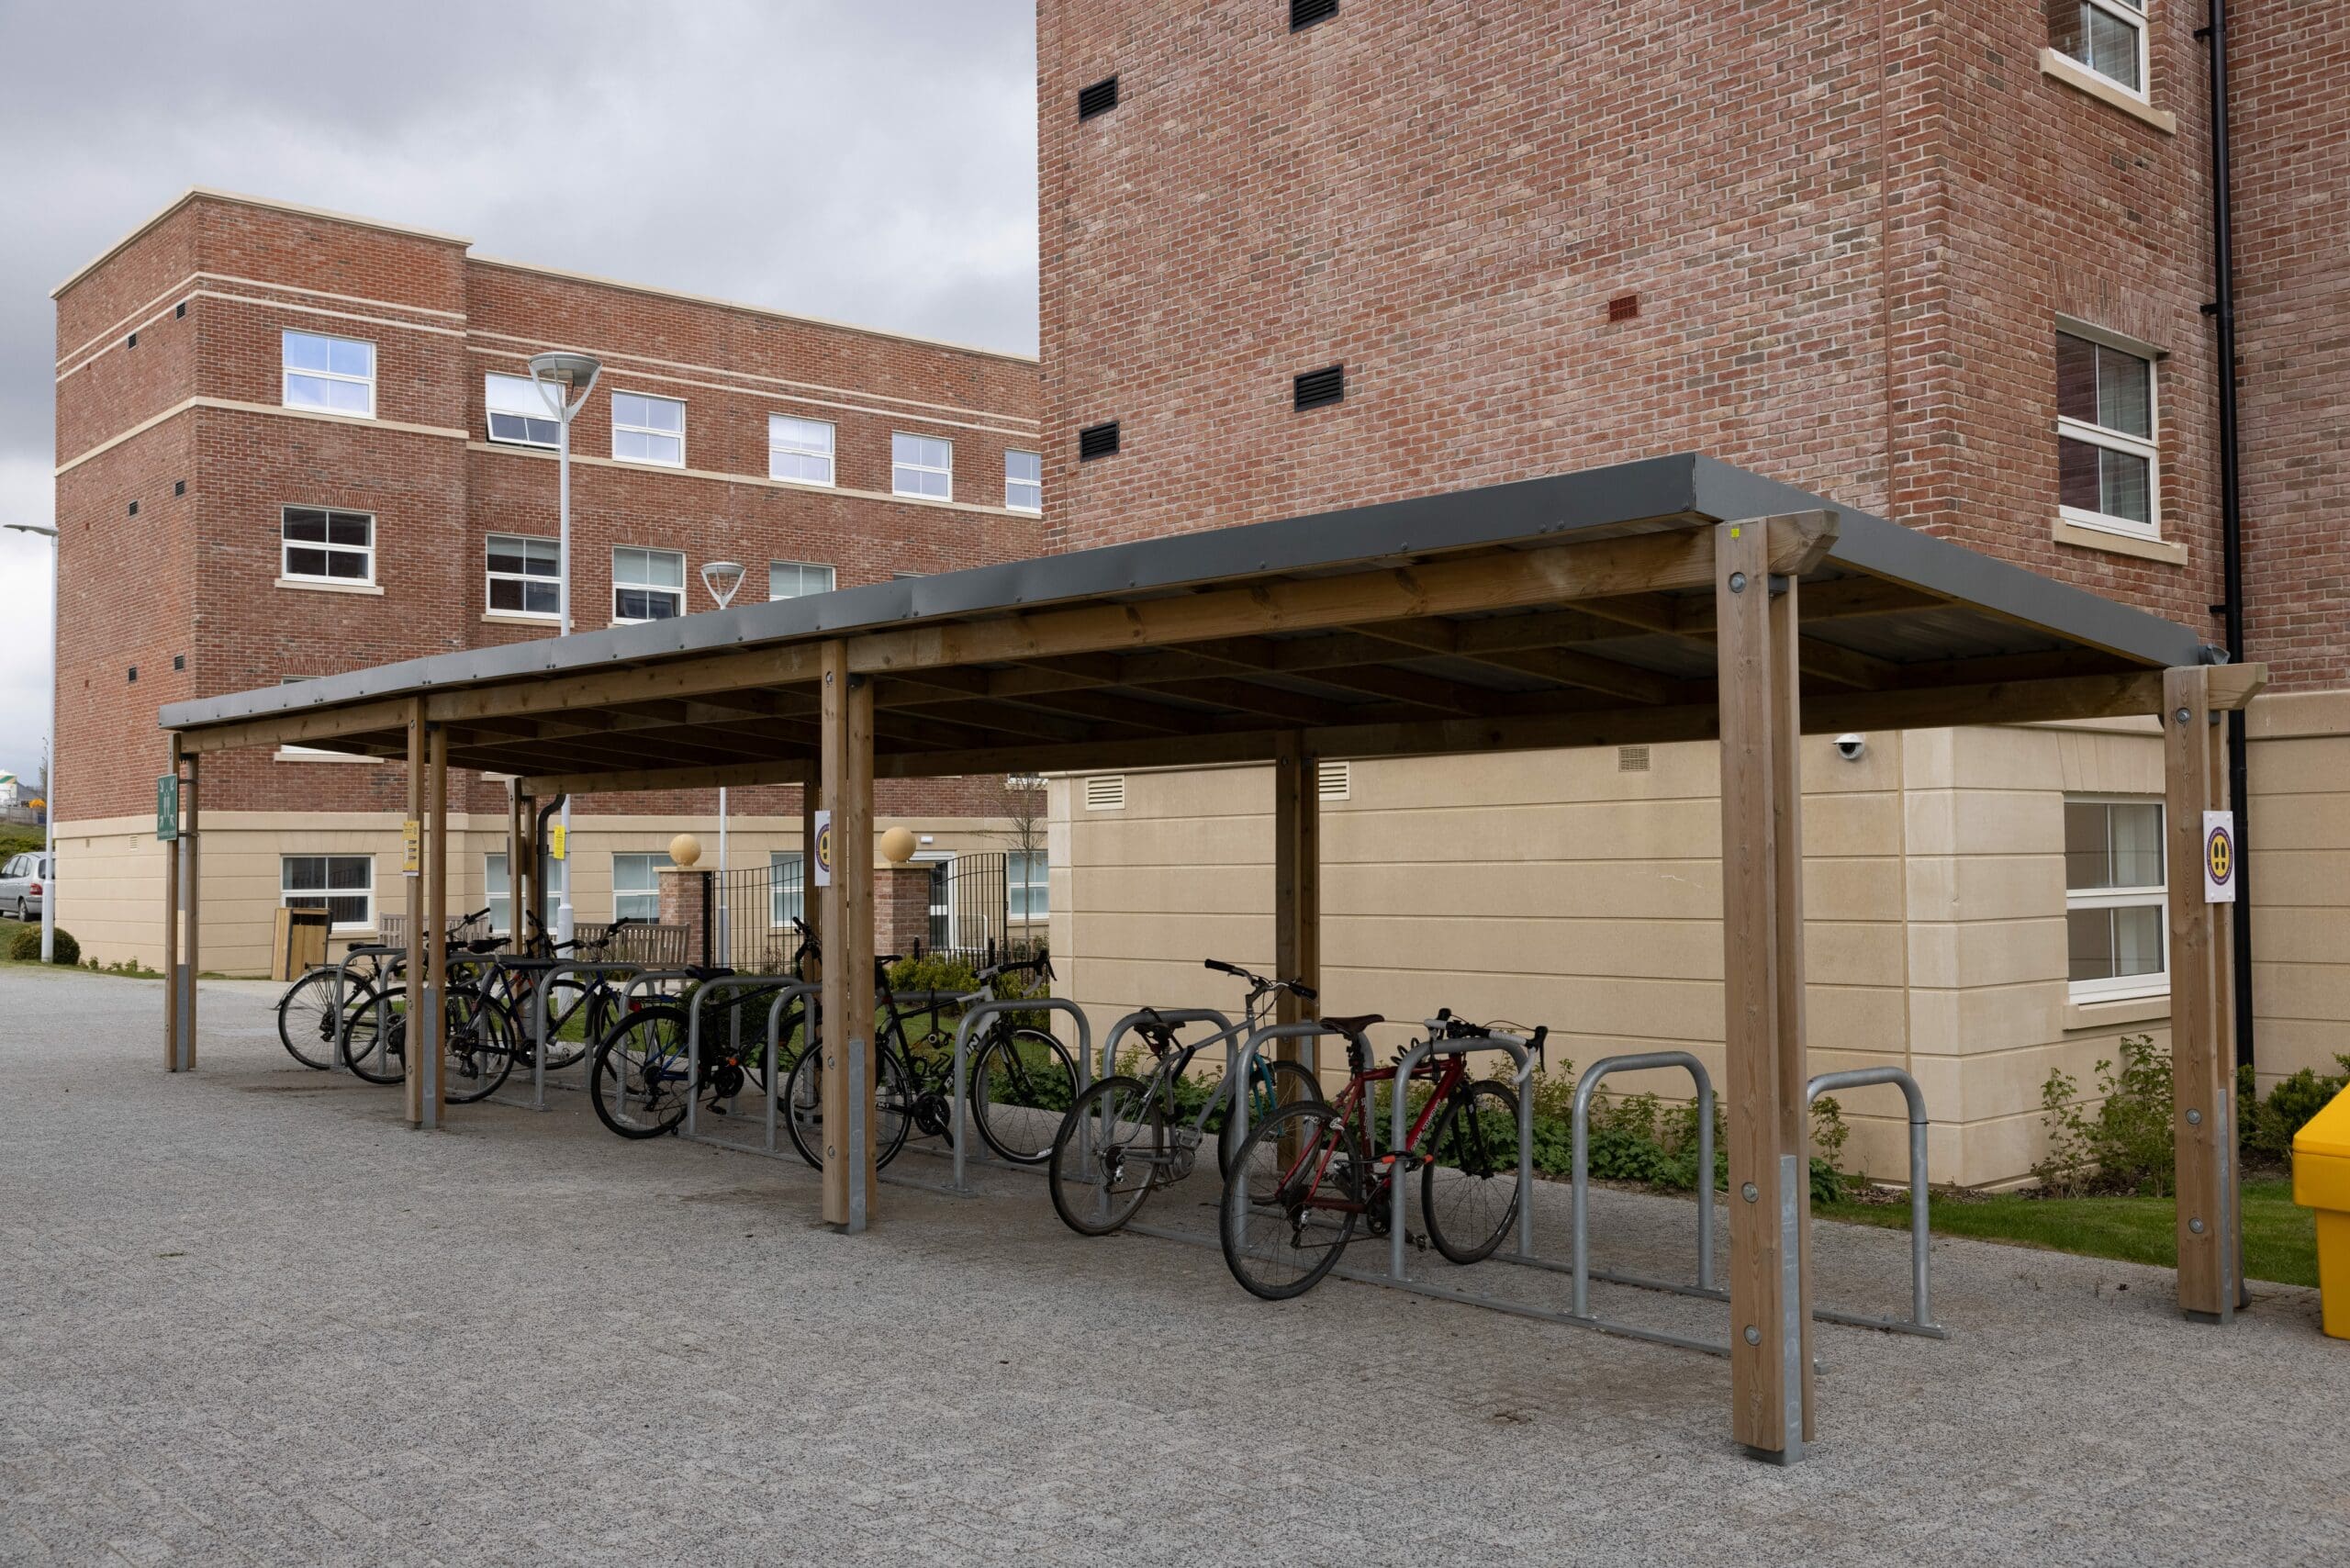 Outdoor wooden pergola canopy with bicycle security hoops underneath